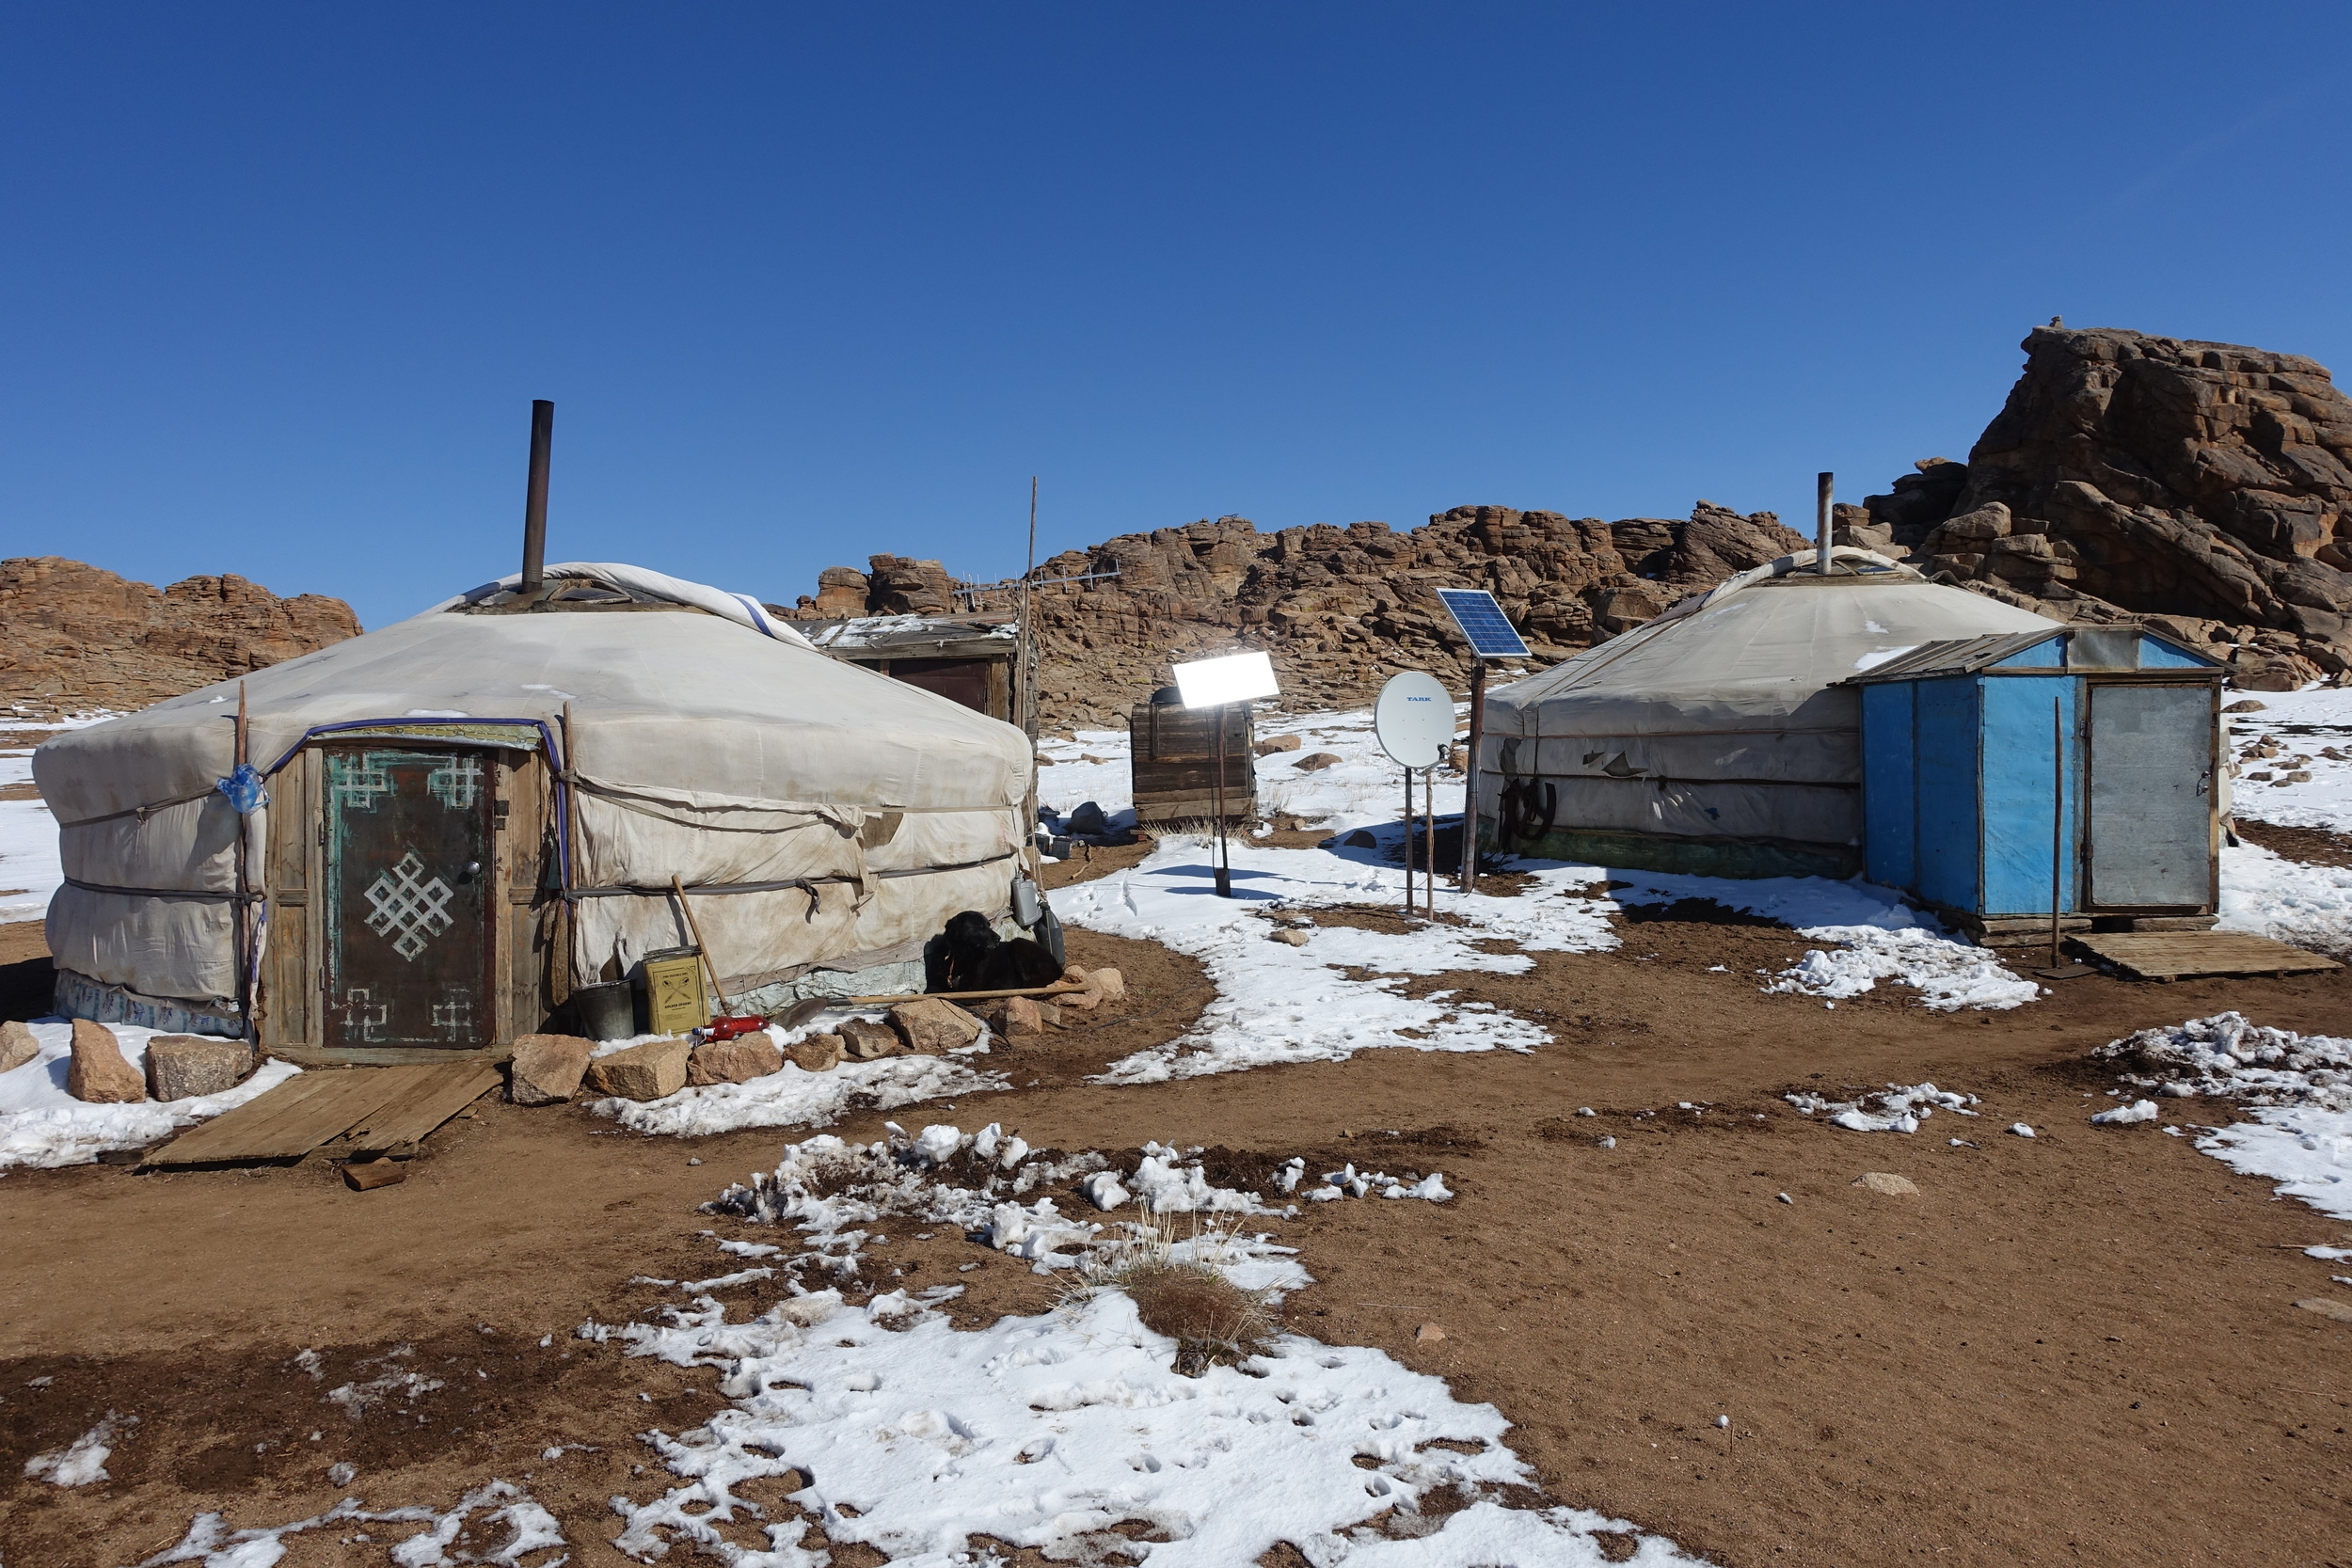  Building a second ger to host tourists allows nomadic families to increase their income. For tourists, this authentic type of accommodation gives a genuine experience of the Mongolian nomadic life. 